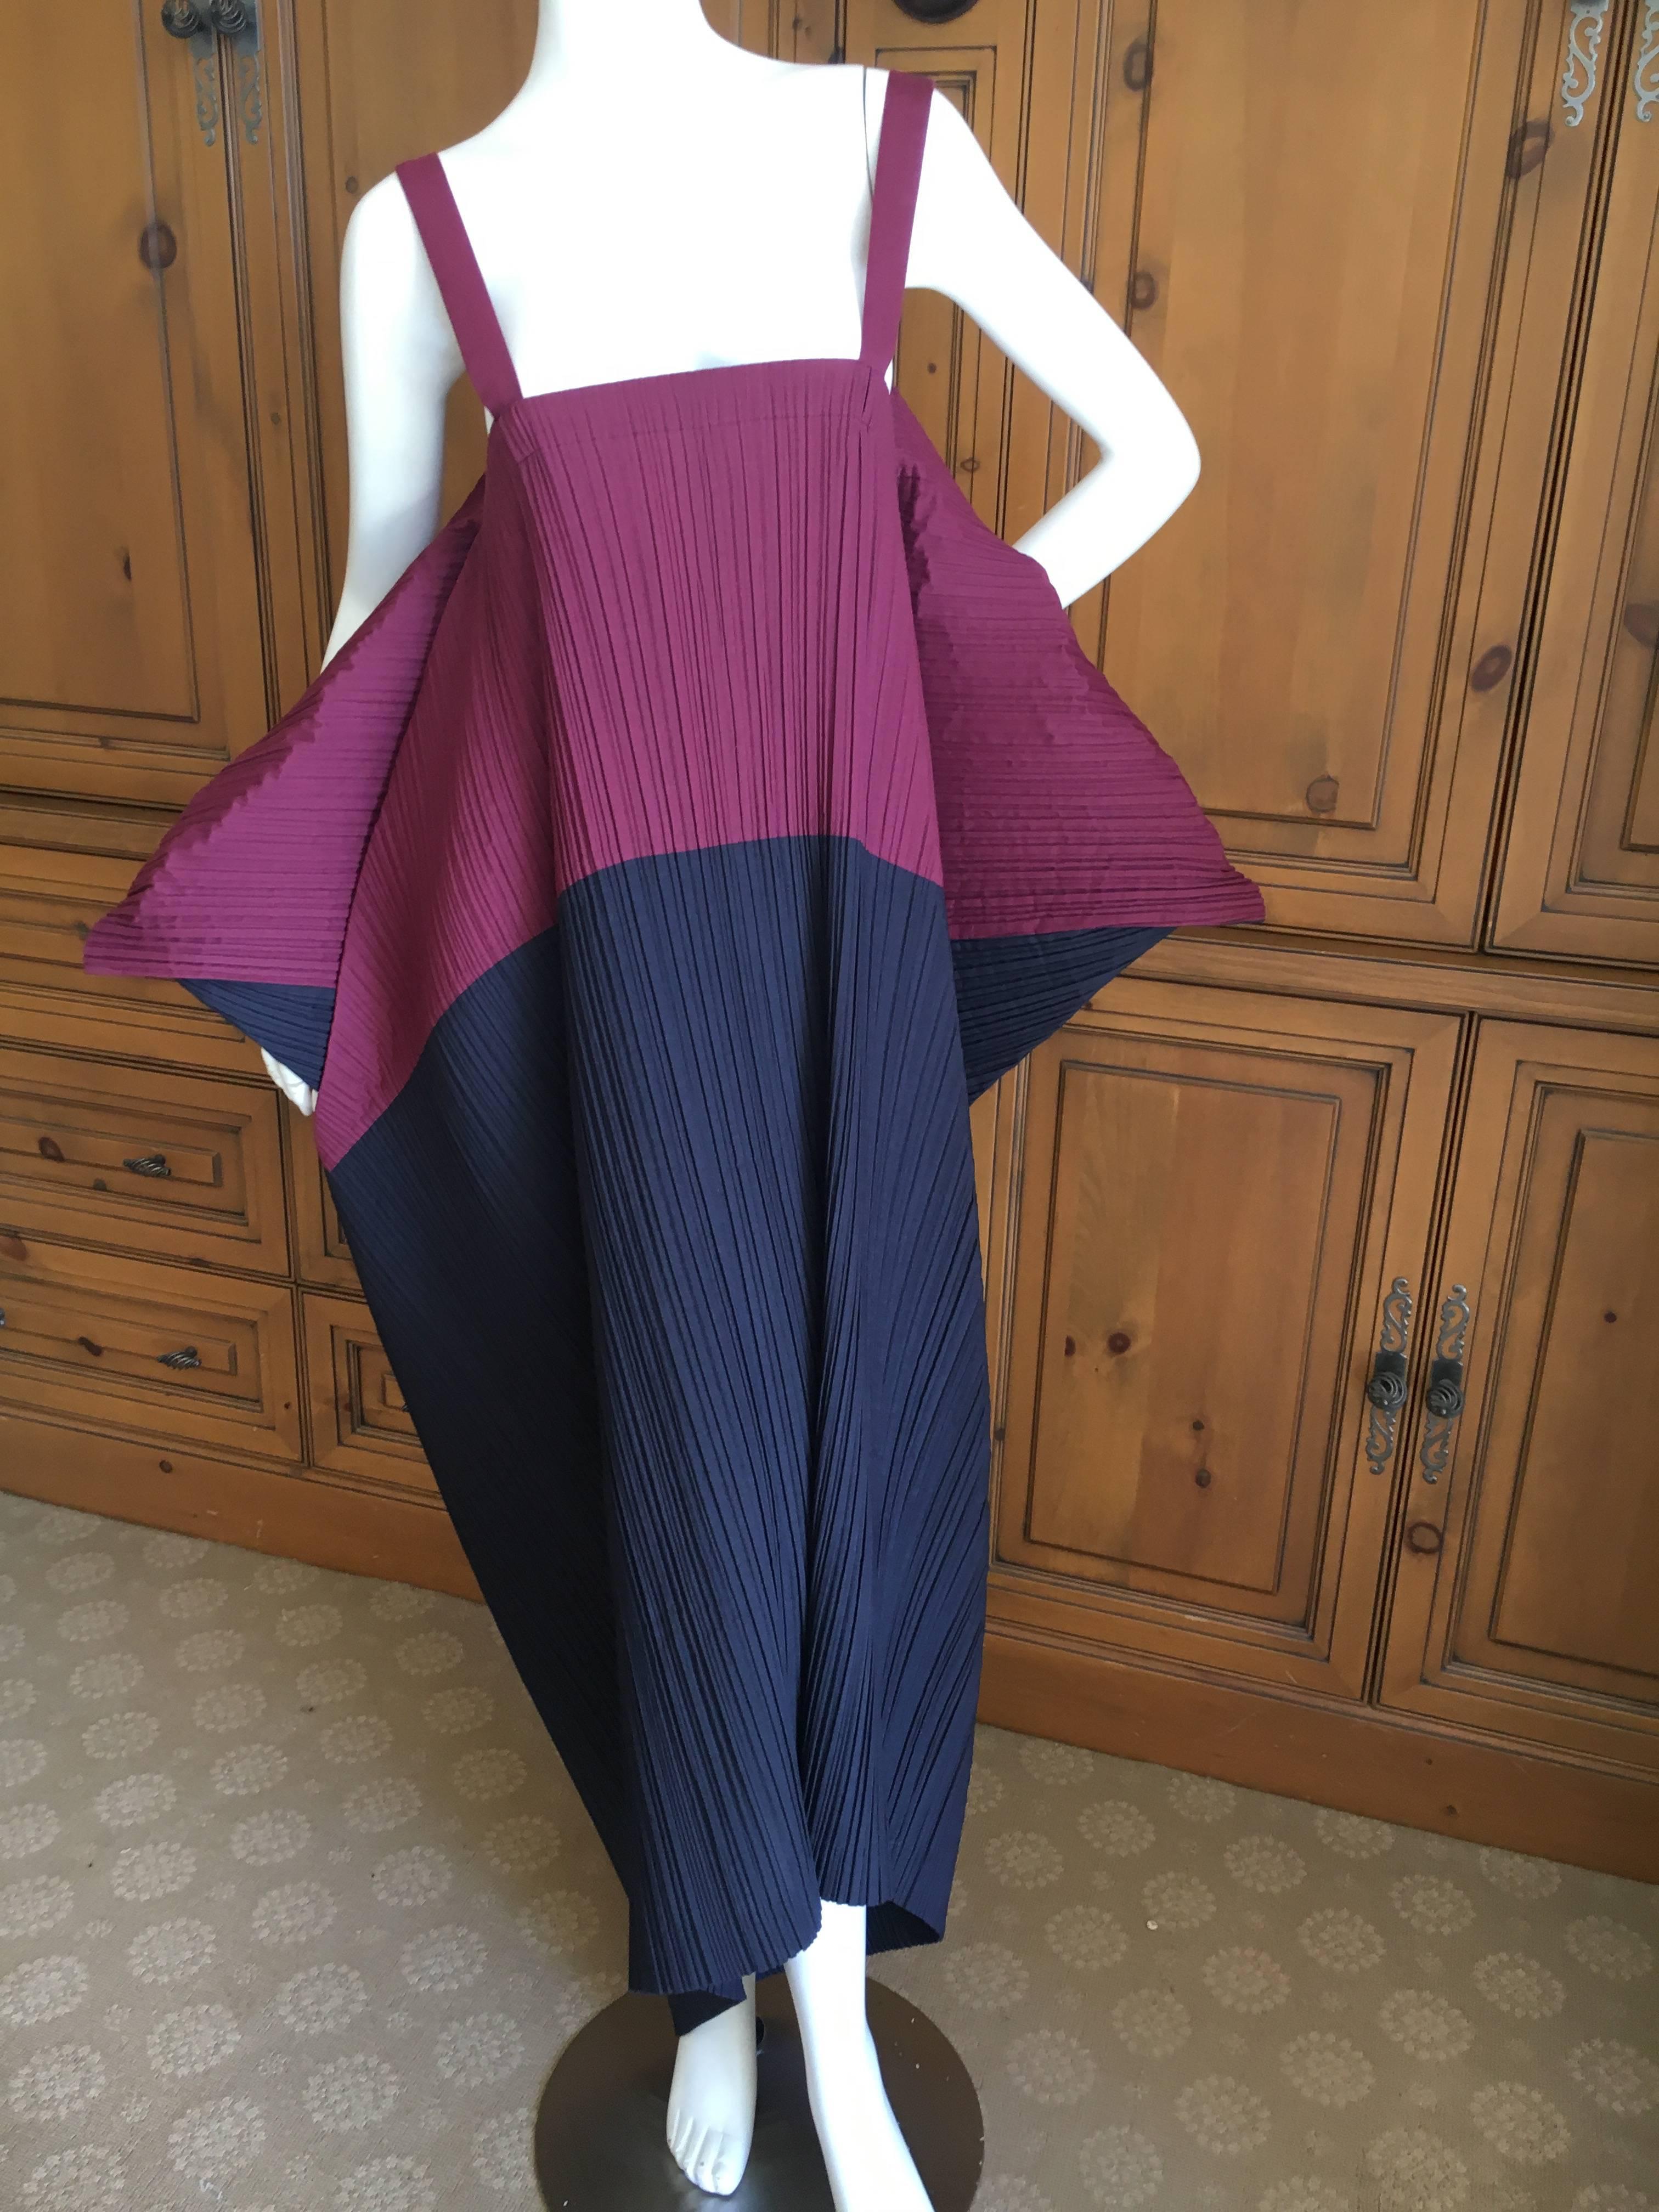 Issey Miyake for Bergdorf Goodman 1990 Colorblock Pleated Bubble Dress In Excellent Condition For Sale In Cloverdale, CA